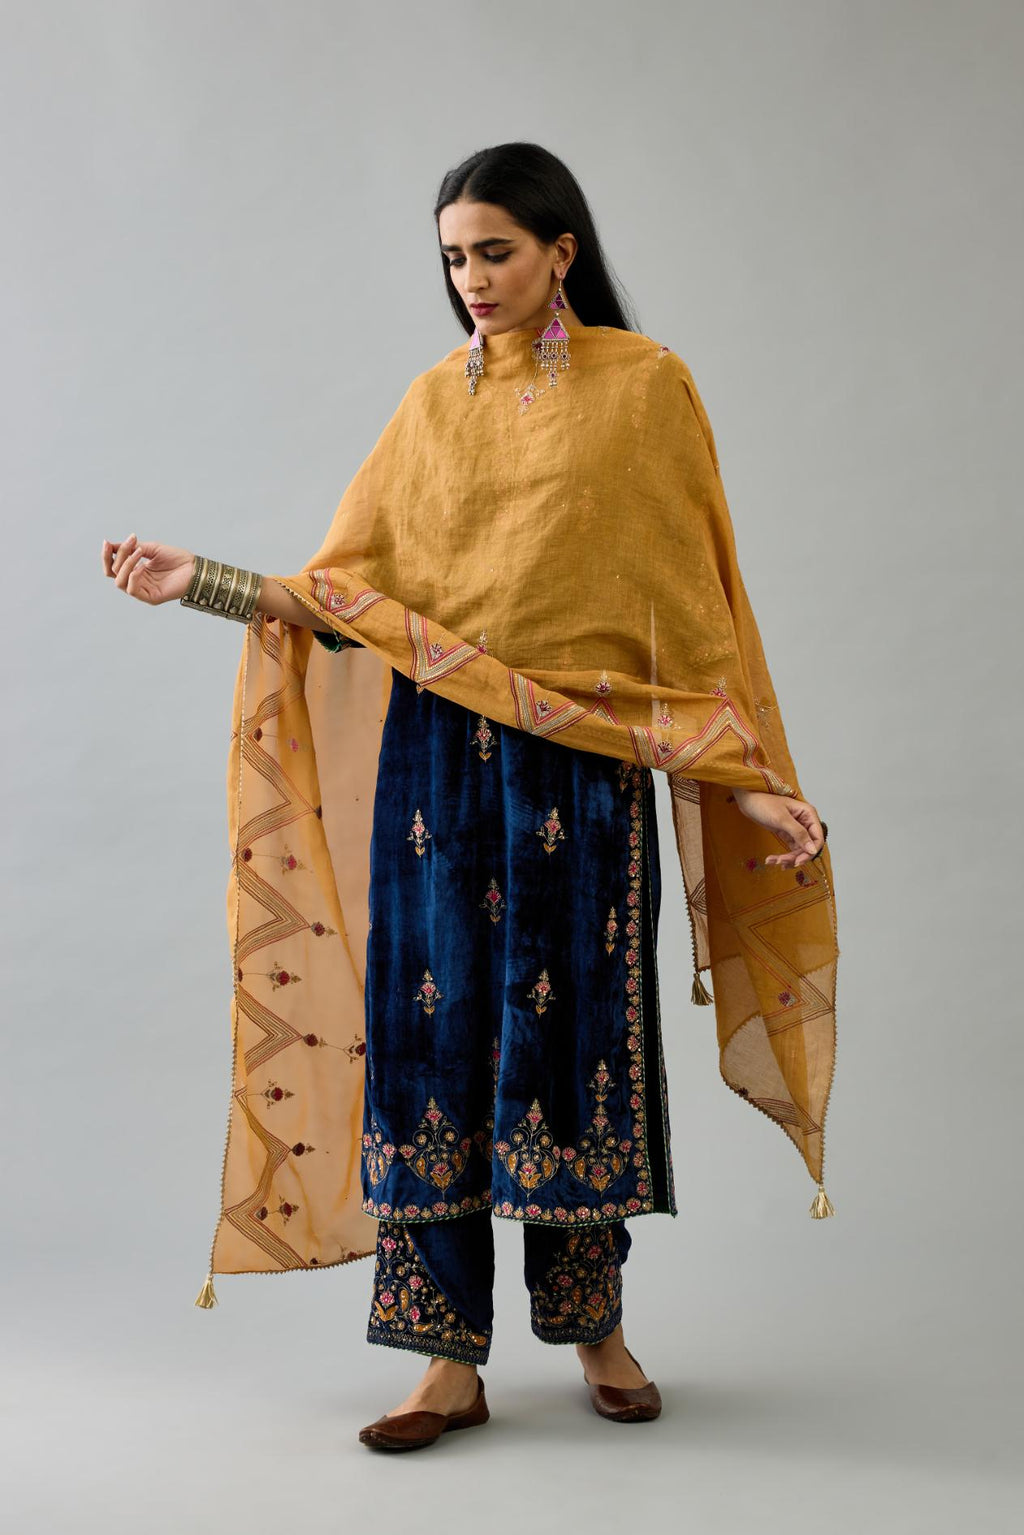 Blue silk velvet straight kurta set with all-over zari, dori and contrast silk thread embroidery, highlighted with gold sequins work.